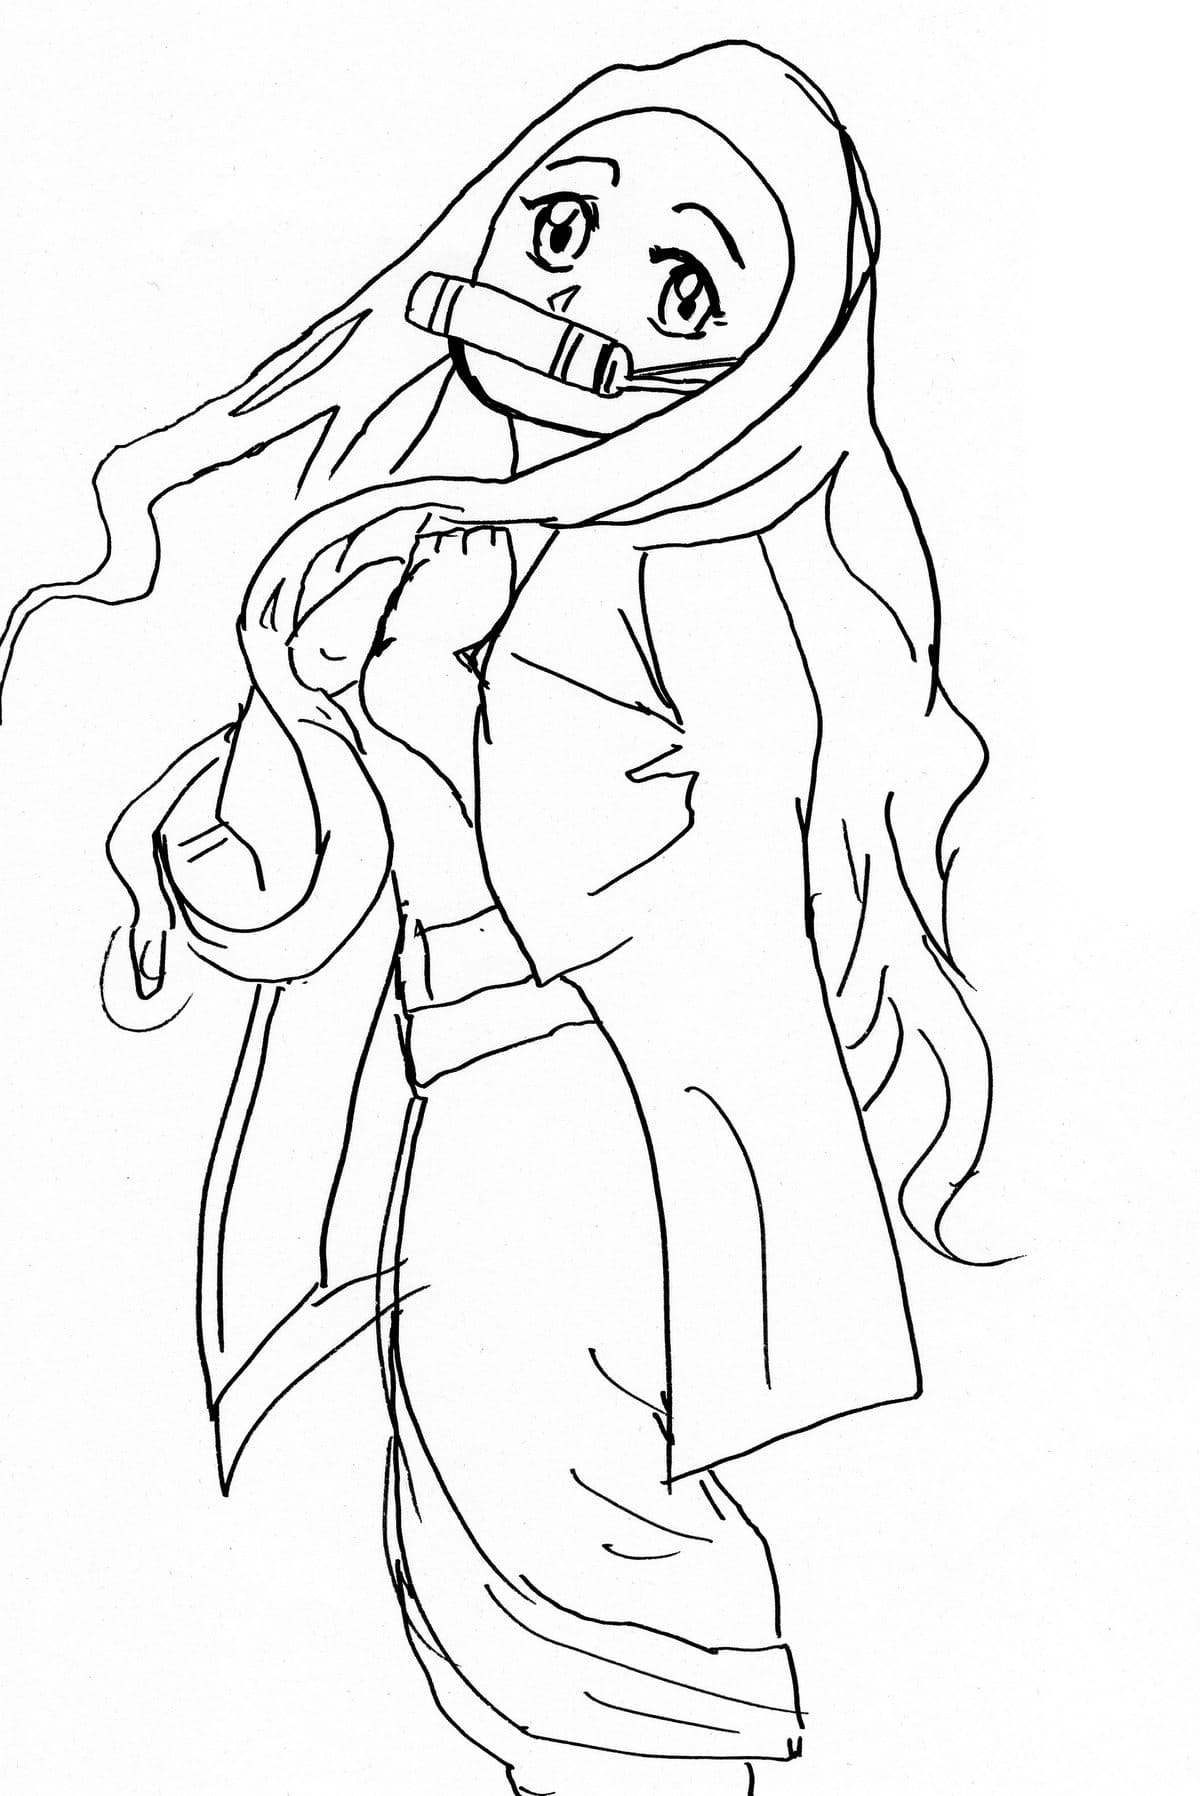 Coloring Pages Nezuko Kamado - Print for free